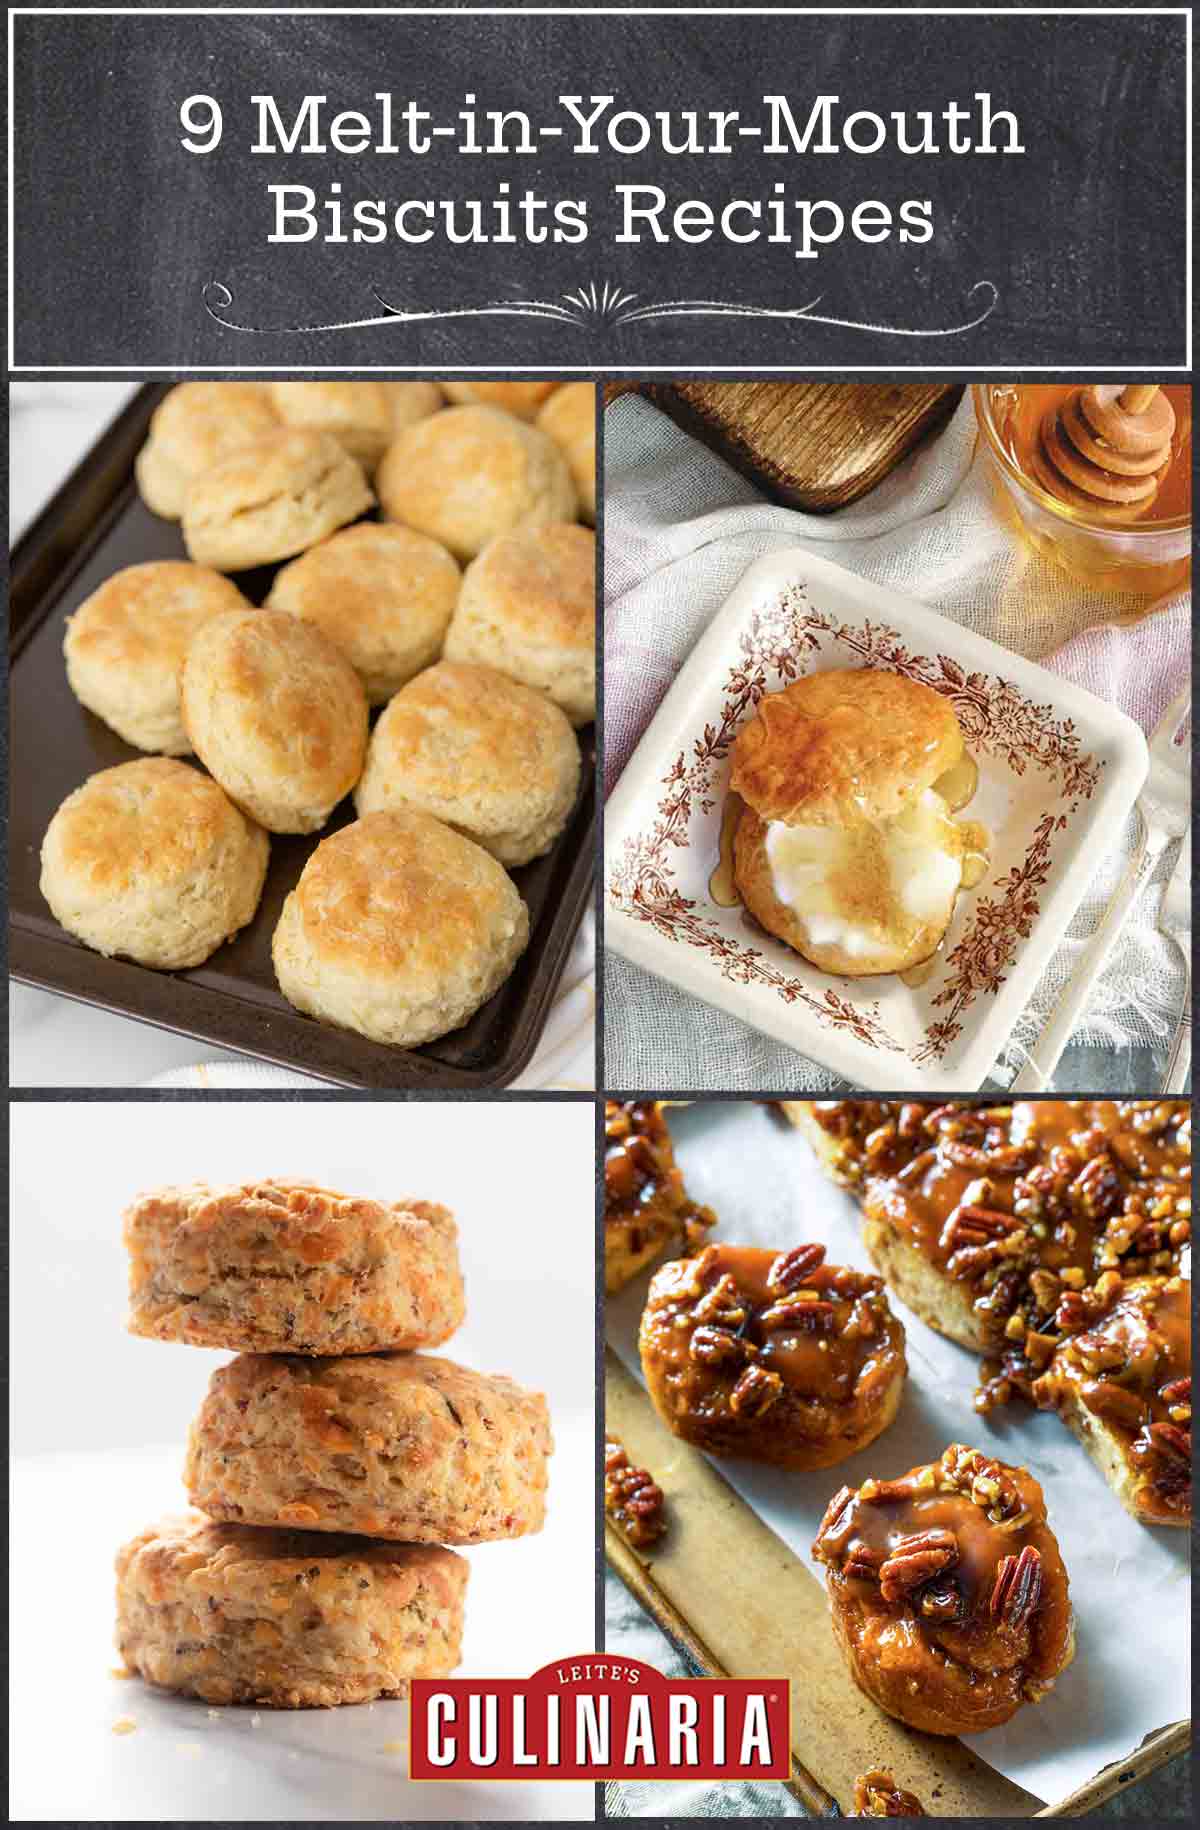 A tray of cream biscuits, a sweet potato biscuit on a plate, a stack of ham and cheddar biscuits, and a tray of sticky biscuits topped with pecans.